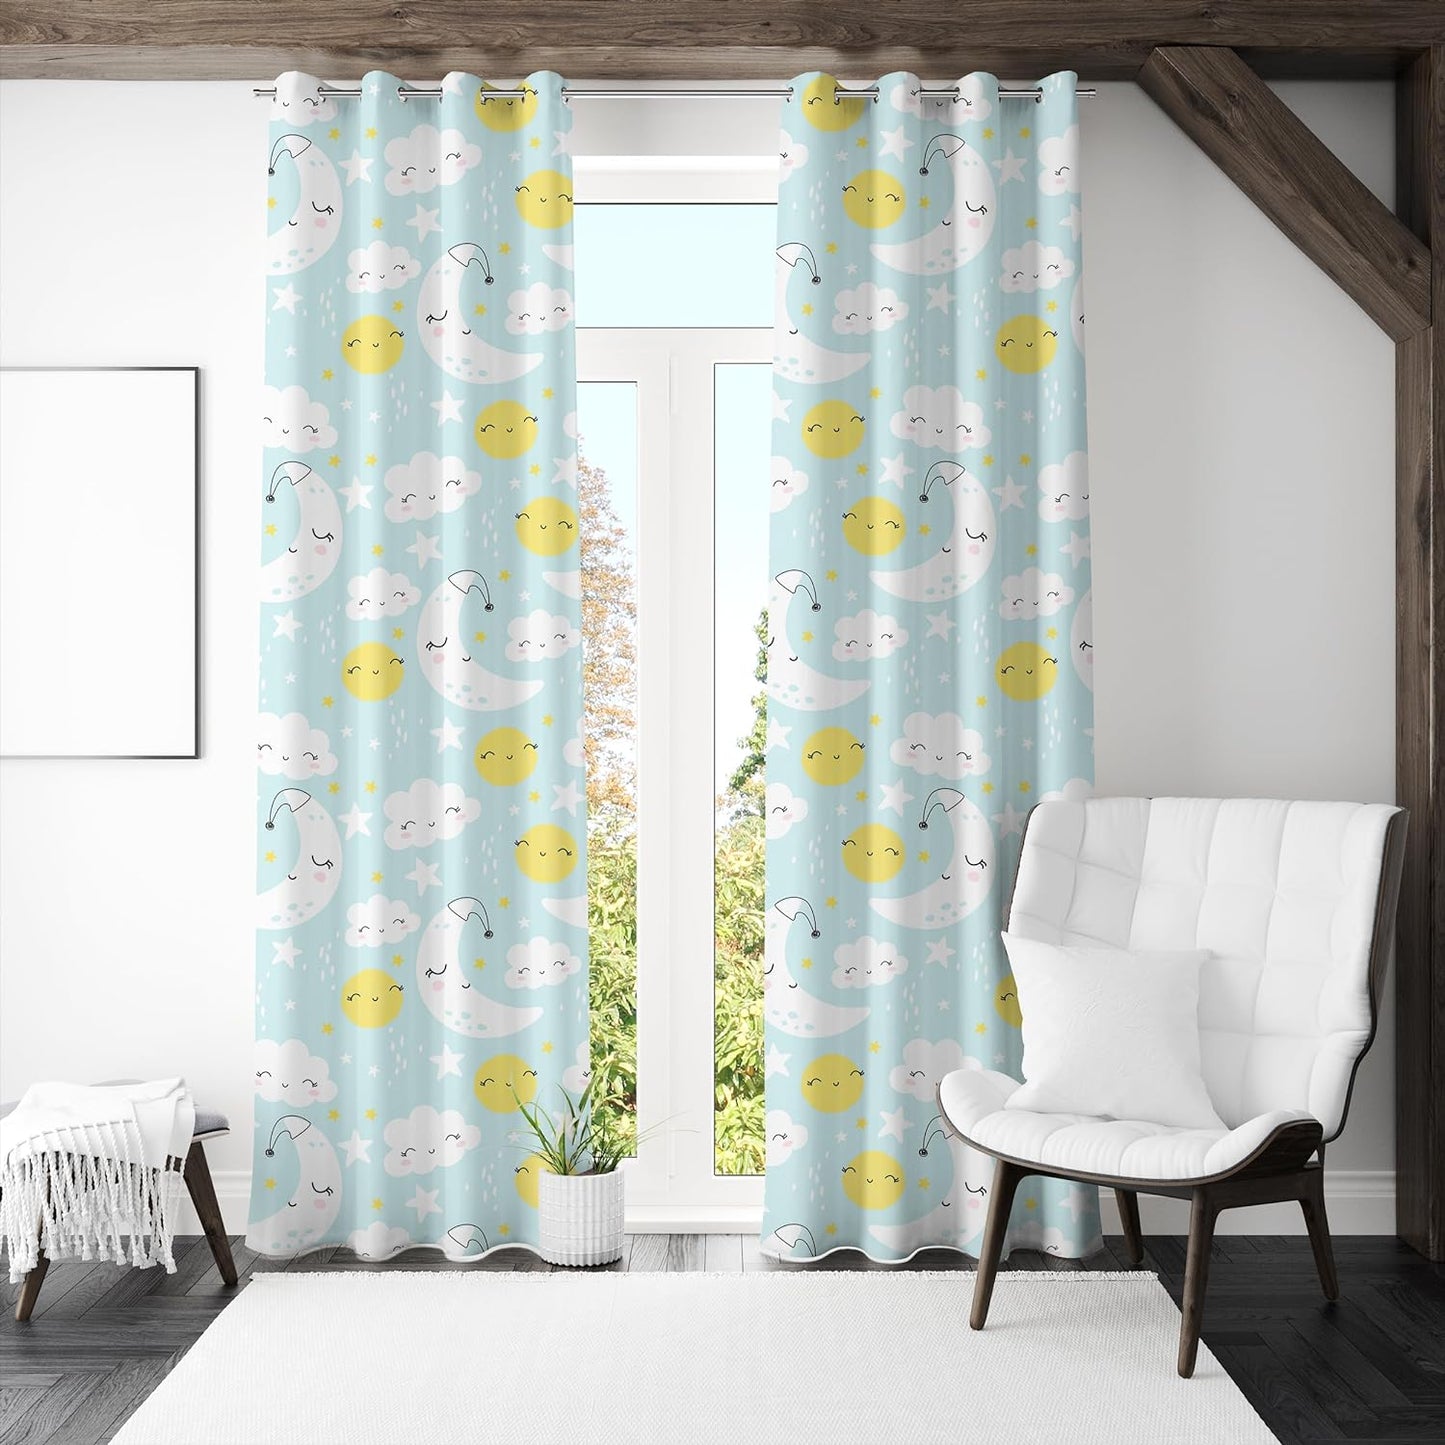  Curtain with cute sun, moon, and clouds in blue and yellow.